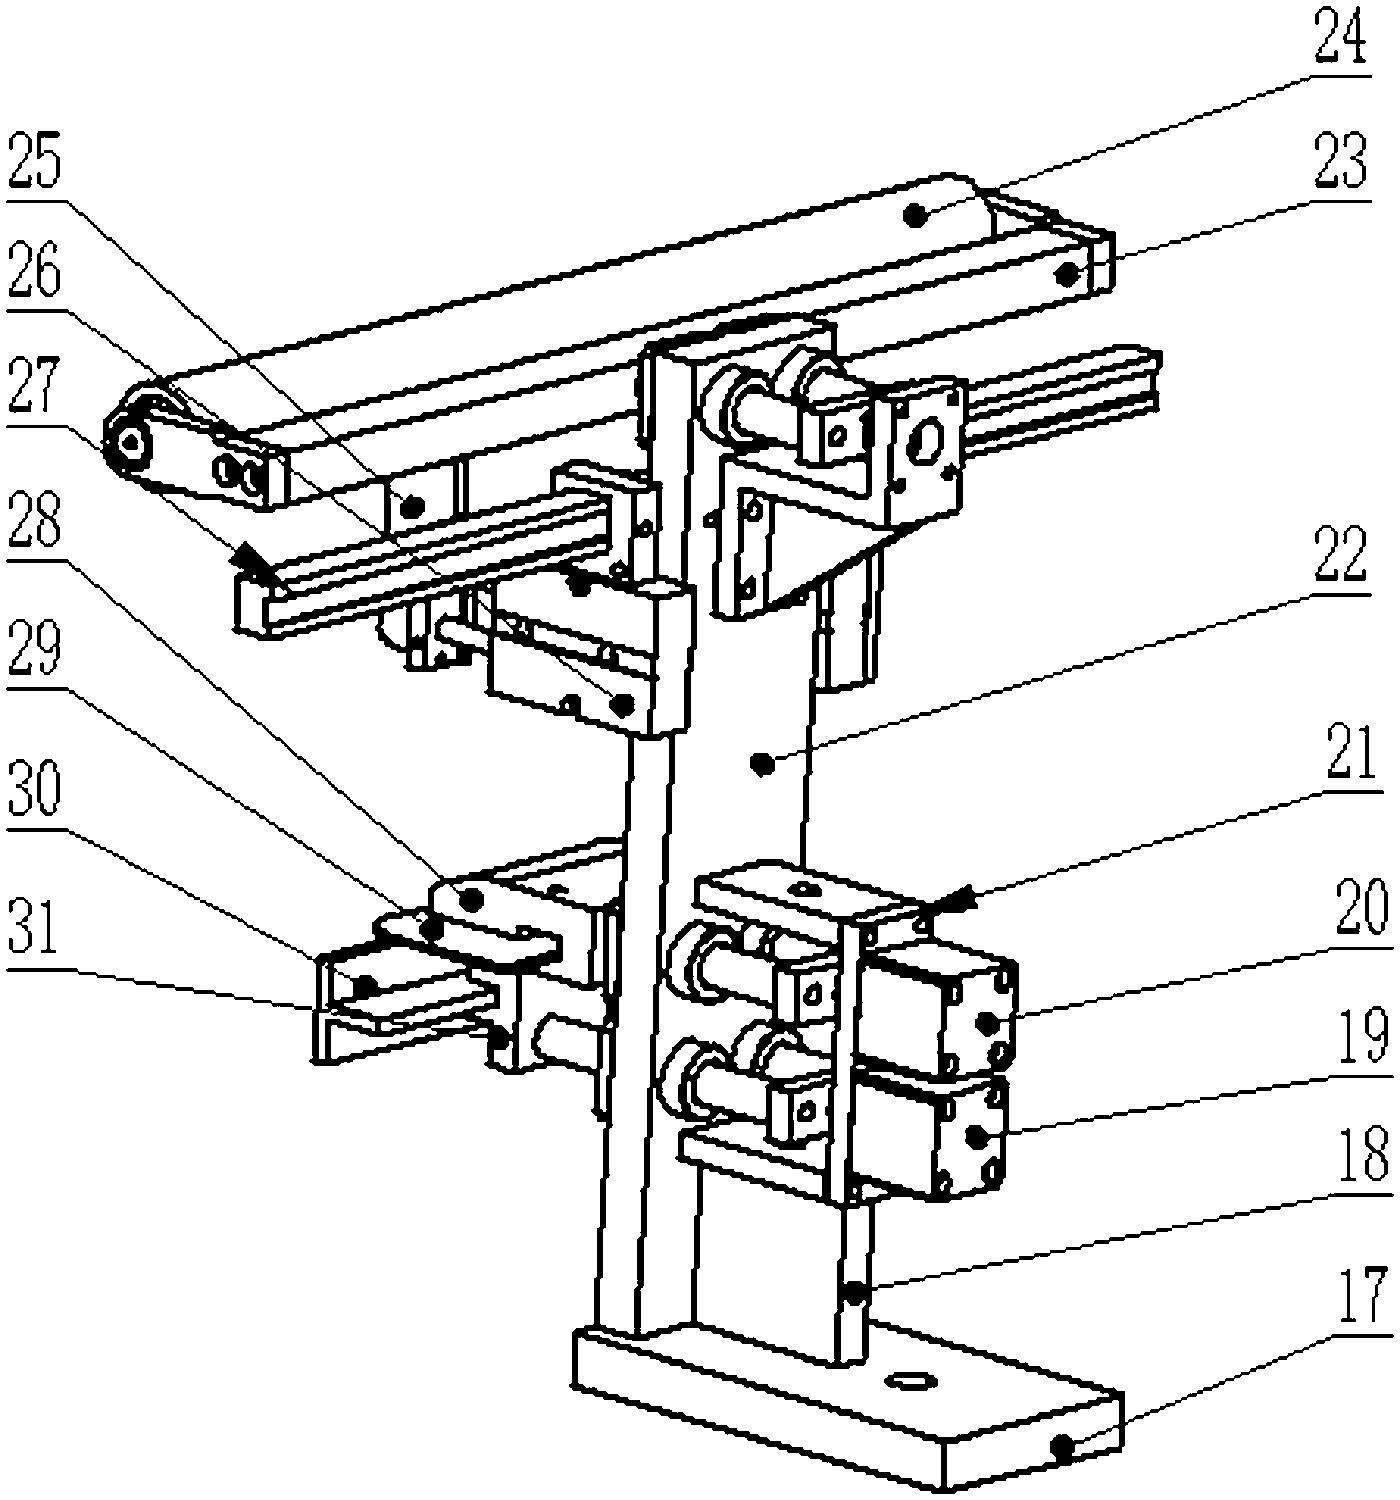 Programmable cylinder-driven carton machine with forming and inward-folding function